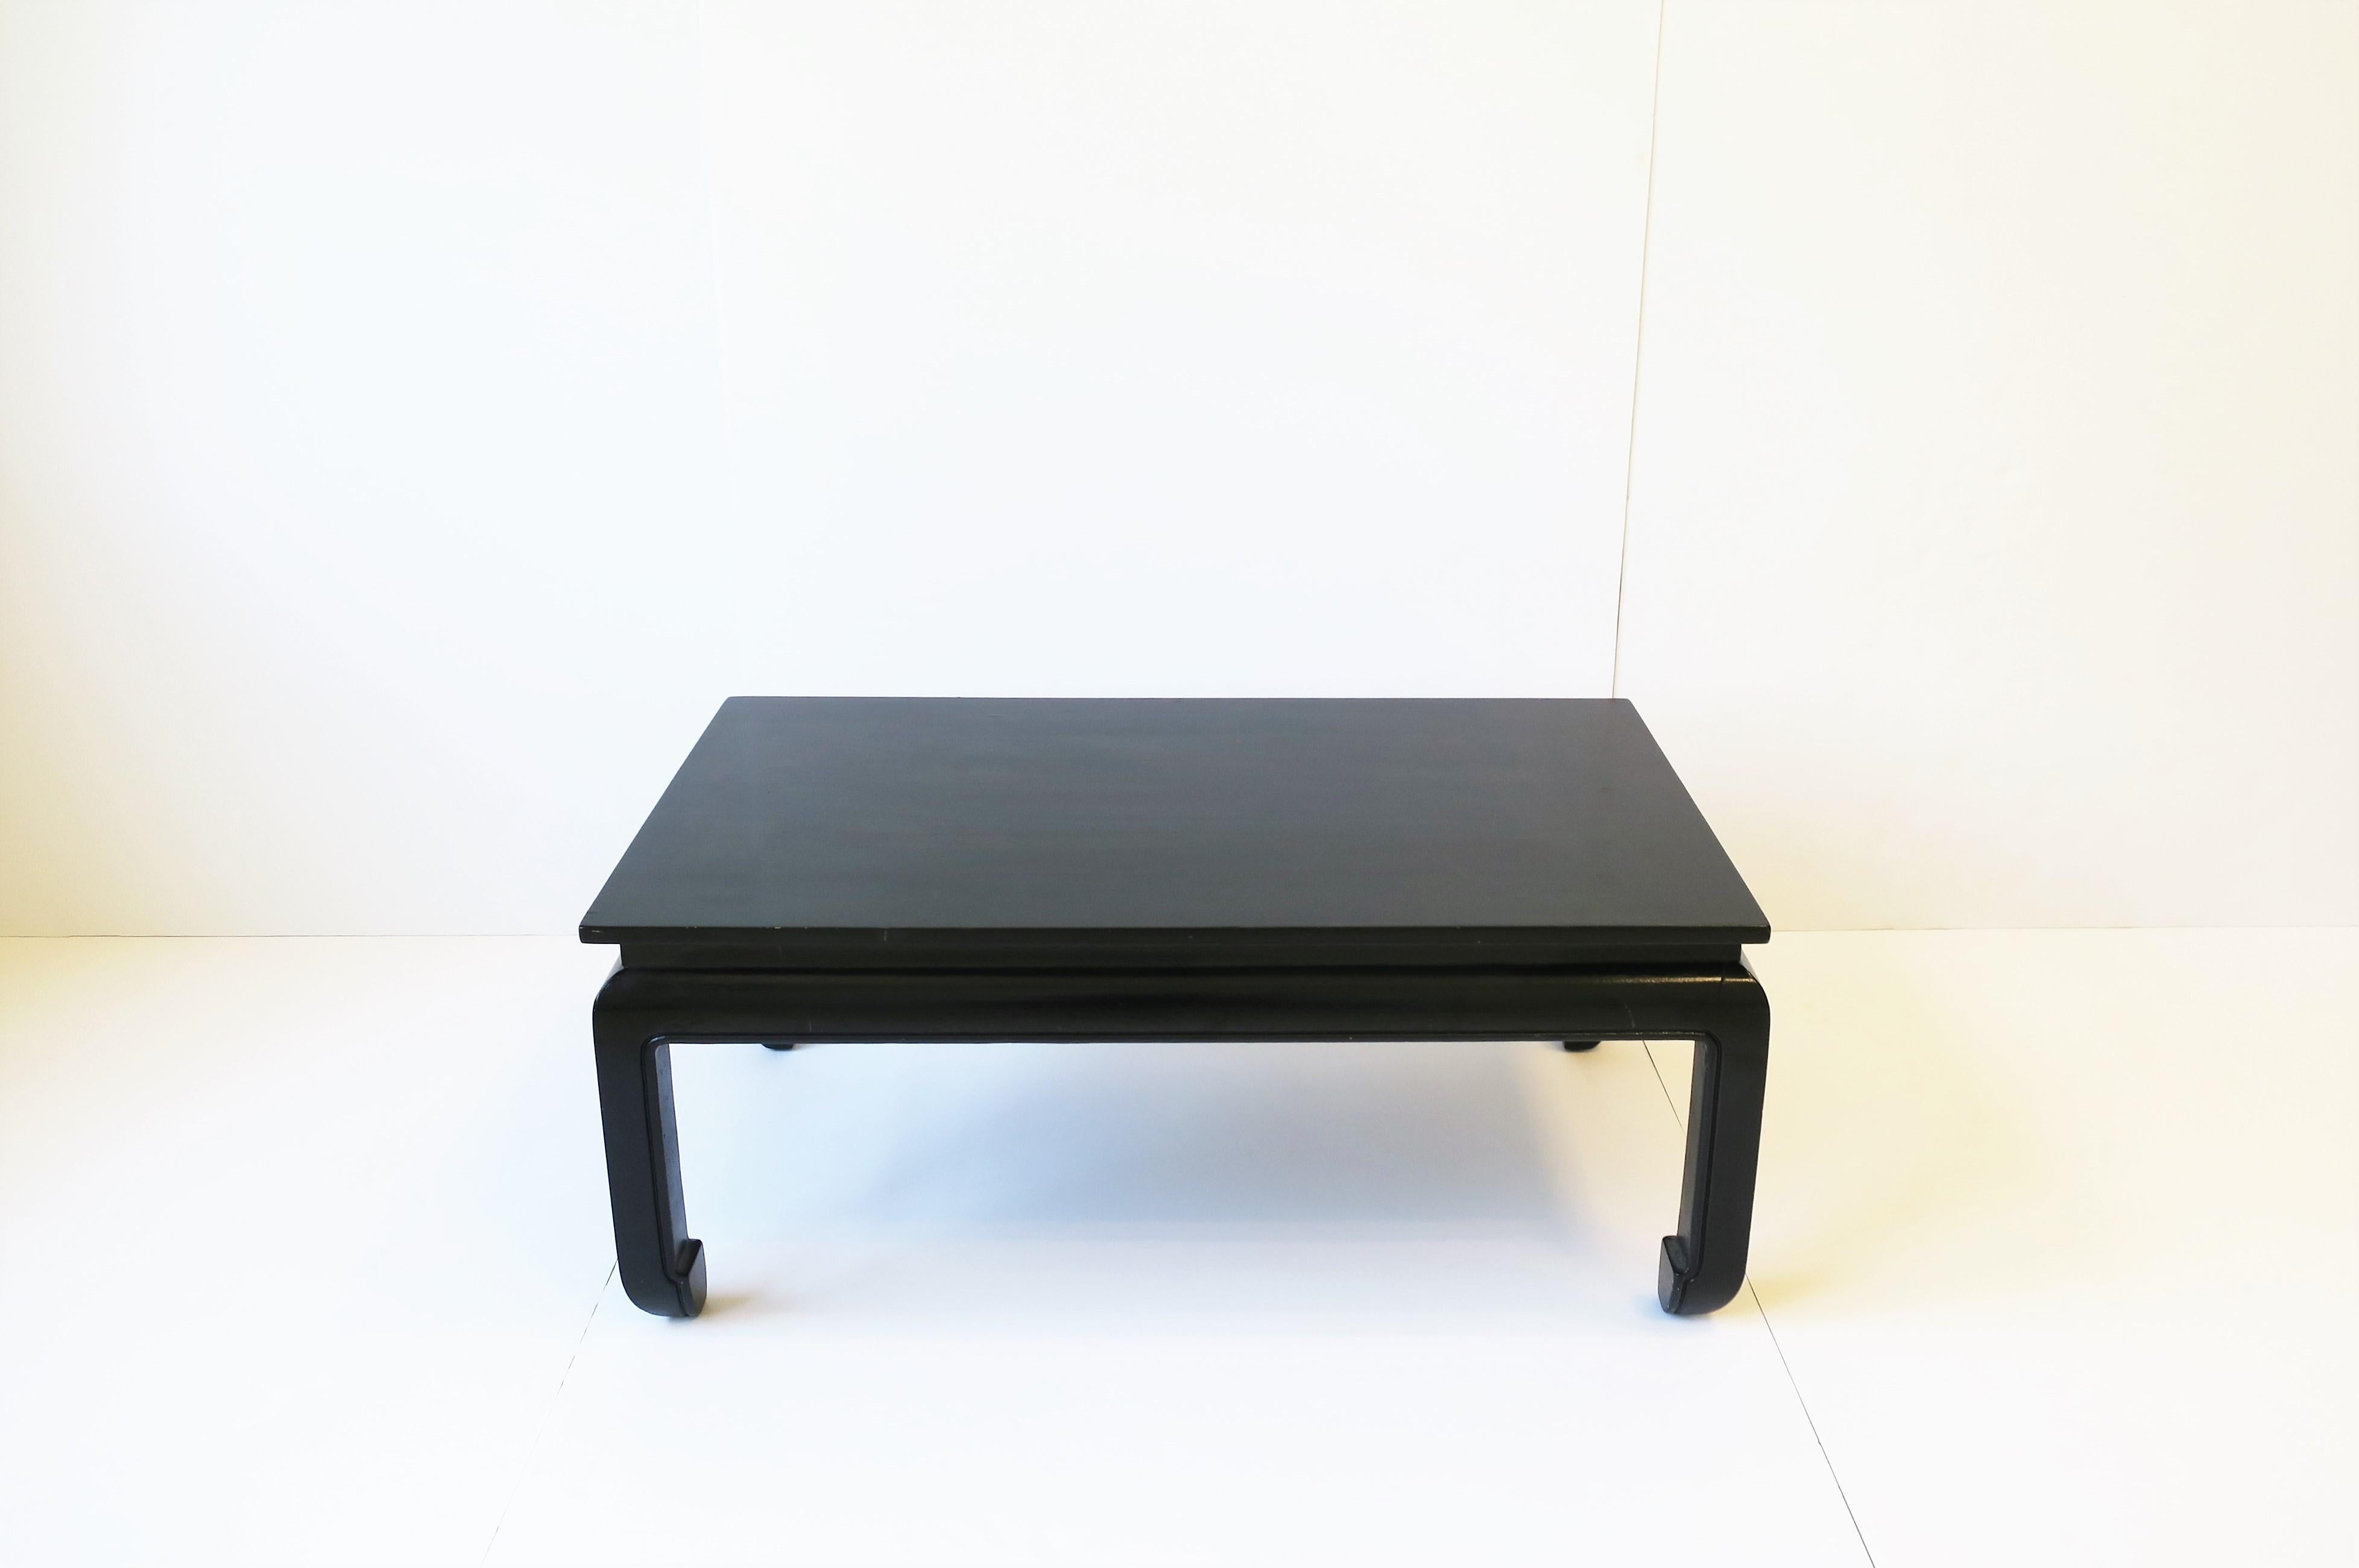 A chinoiserie style black rectangular coffee/cocktail table, circa mid to late-20th century. Black finish, professionally applied, has a nice sheen/shine. Table is convenient size and on the smaller side; Dimensions: 16